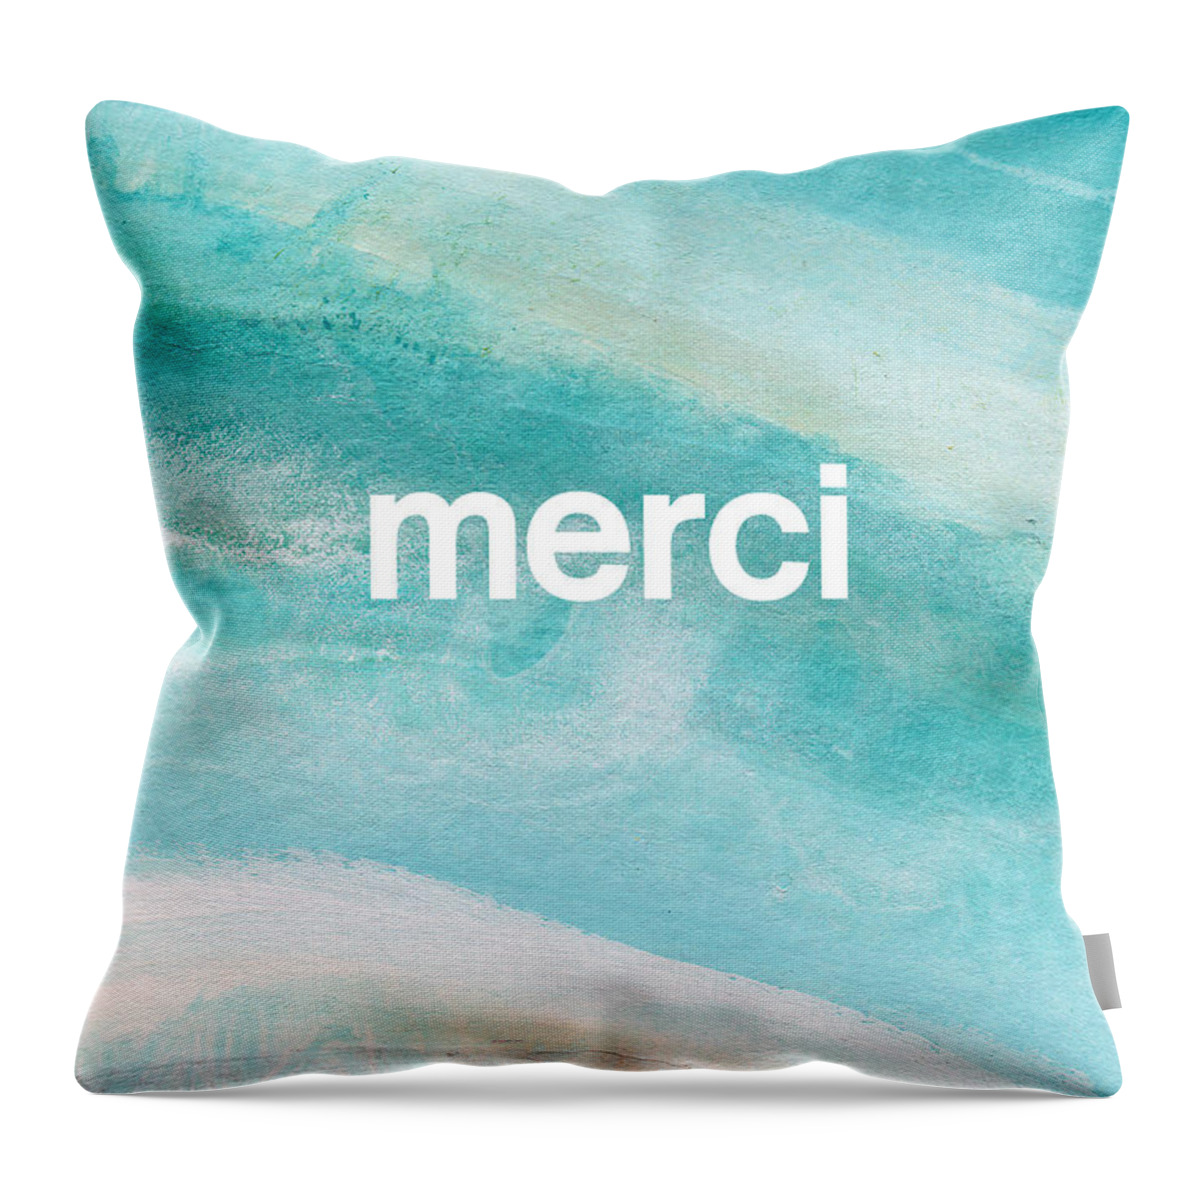 Merci Throw Pillow featuring the painting Merci- art by Linda Woods by Linda Woods